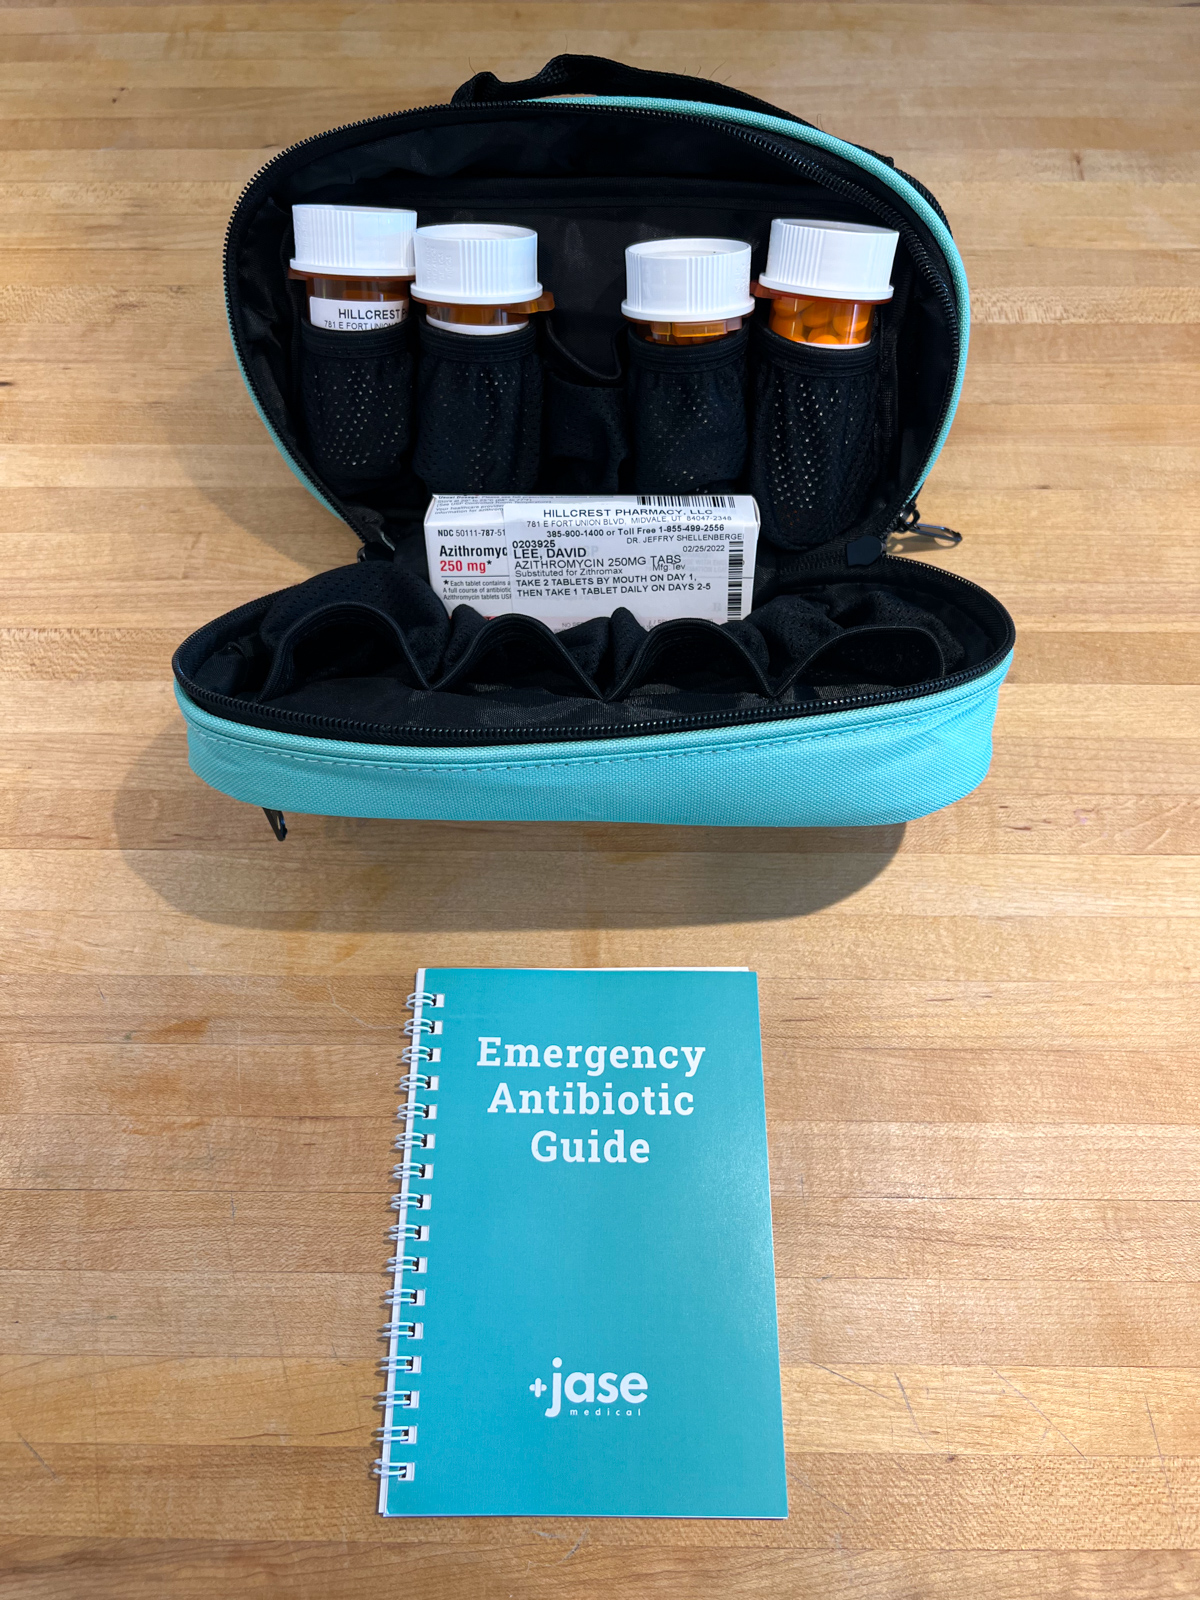 The Jase Case includes five emergency antibiotics and a guide for when to use them. 